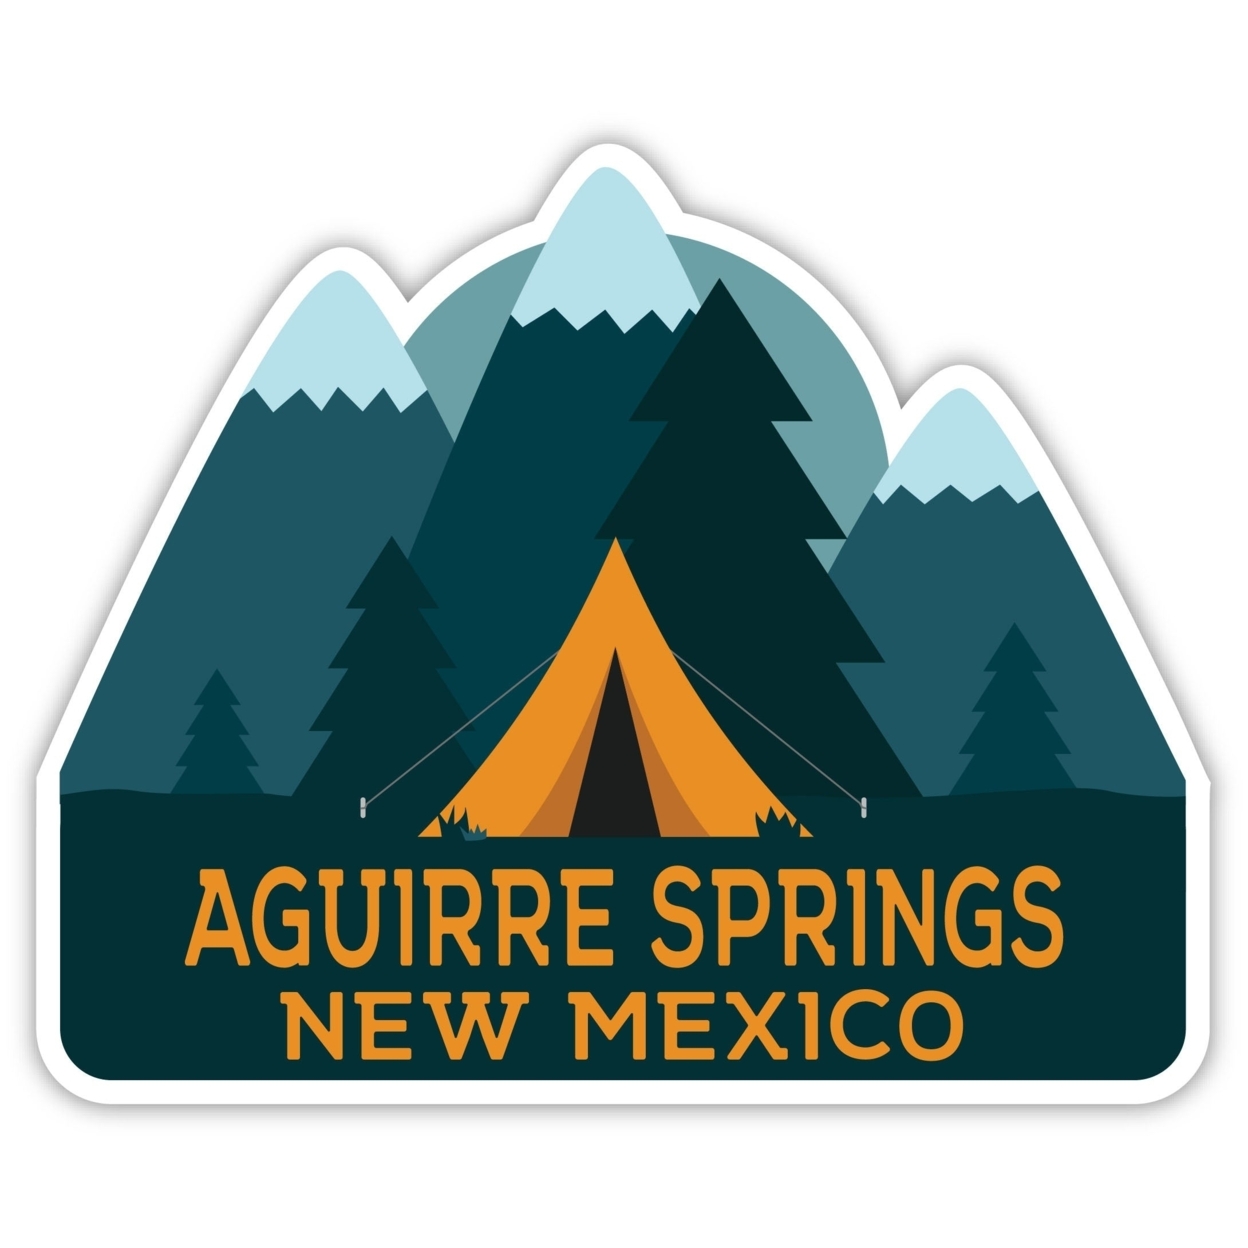 Aguirre Springs New Mexico Souvenir Decorative Stickers (Choose Theme And Size) - 4-Pack, 2-Inch, Tent